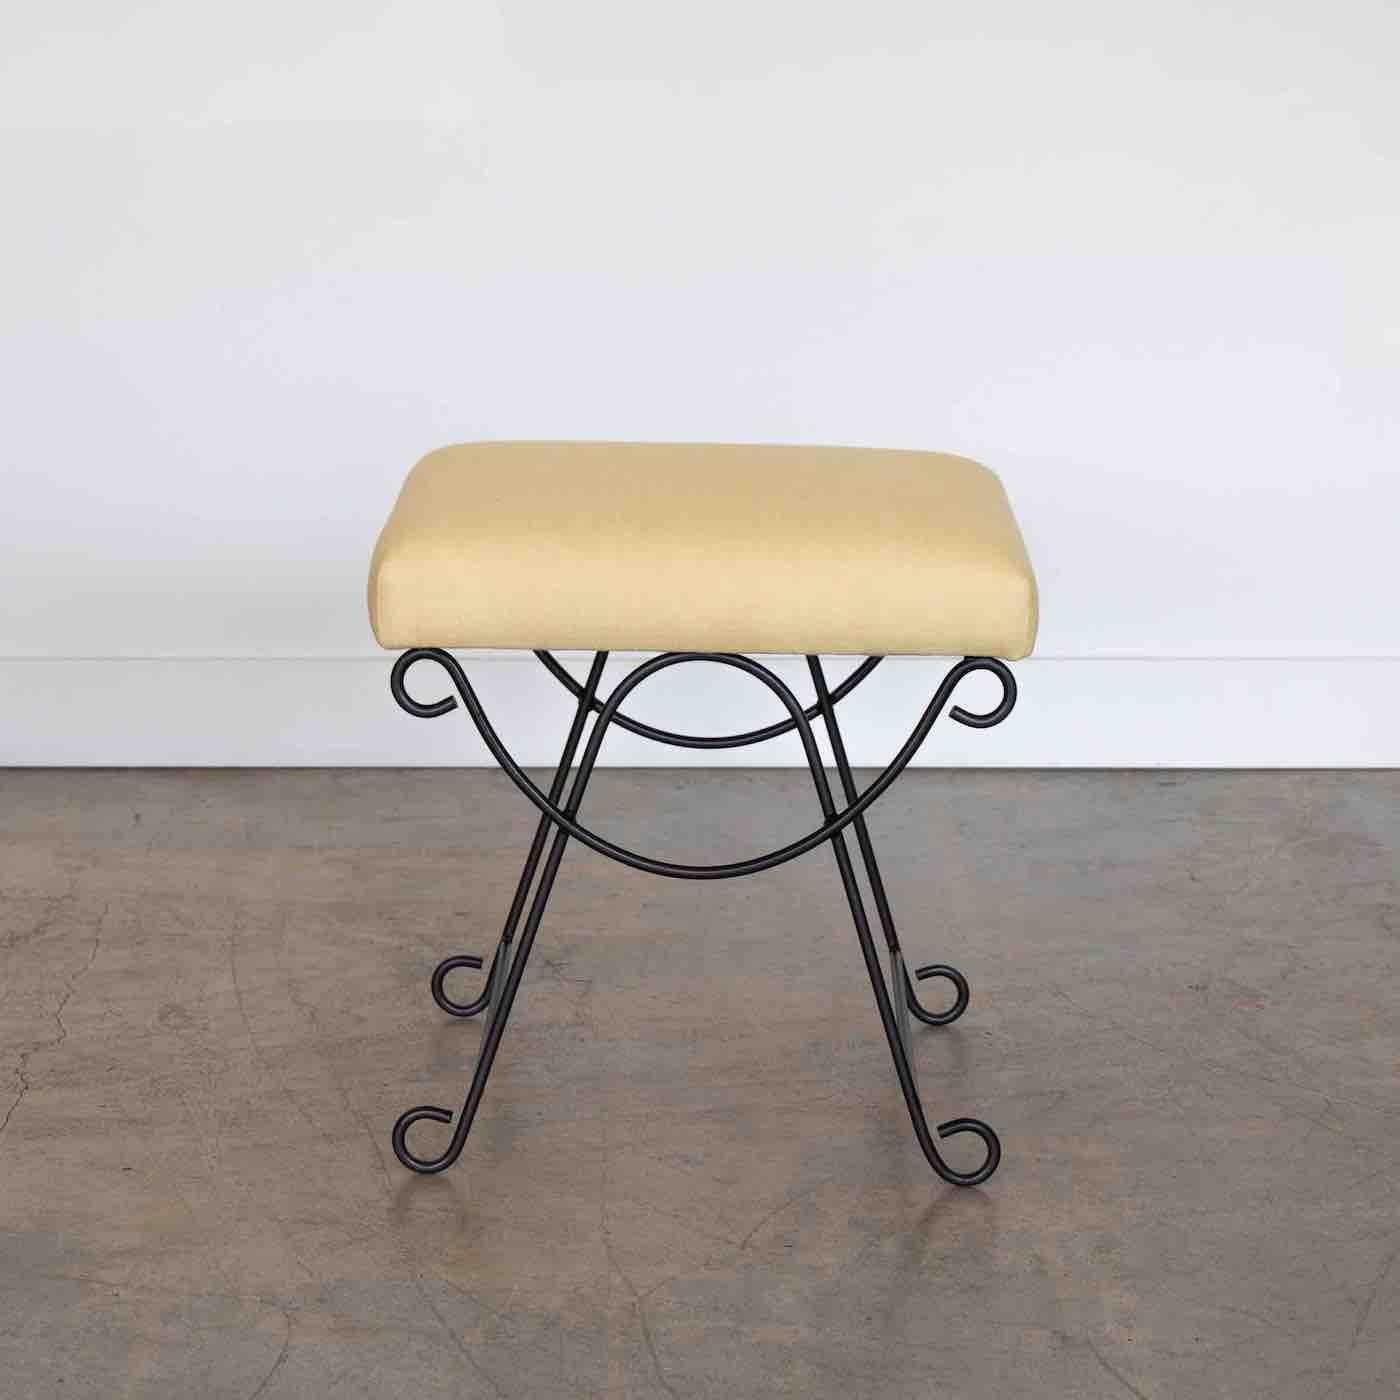 Beautiful iron stool with curved and looped base painted in a matte black finish. Rectangular cushioned seat upholstered in a yellow linen or can be COM. 